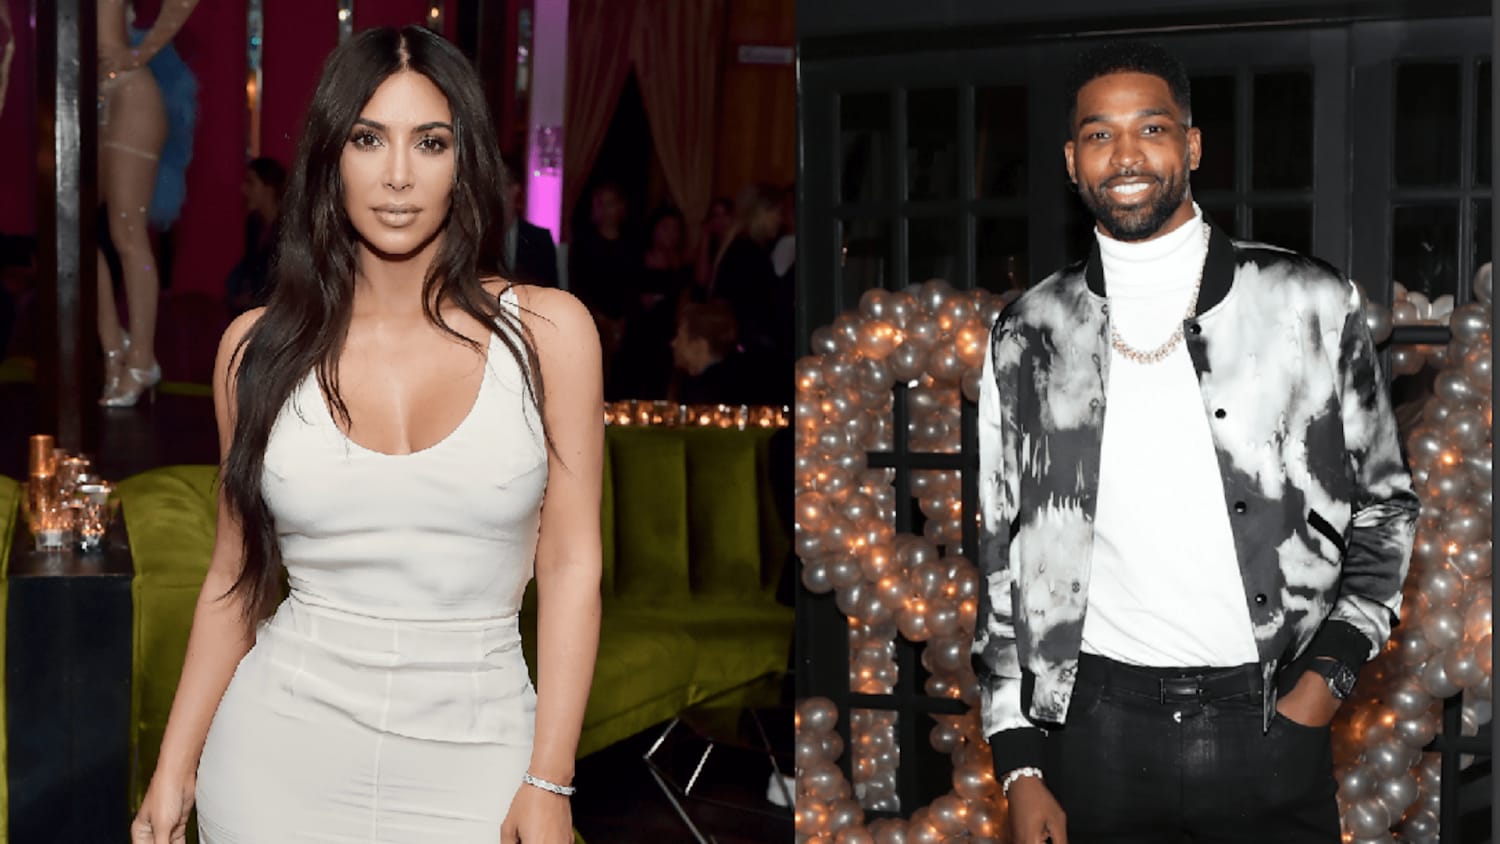 Kim Kardashian almost runs into Khloe's ex Tristan Thompson while grabbing dinner with friends in NYC - Boom News